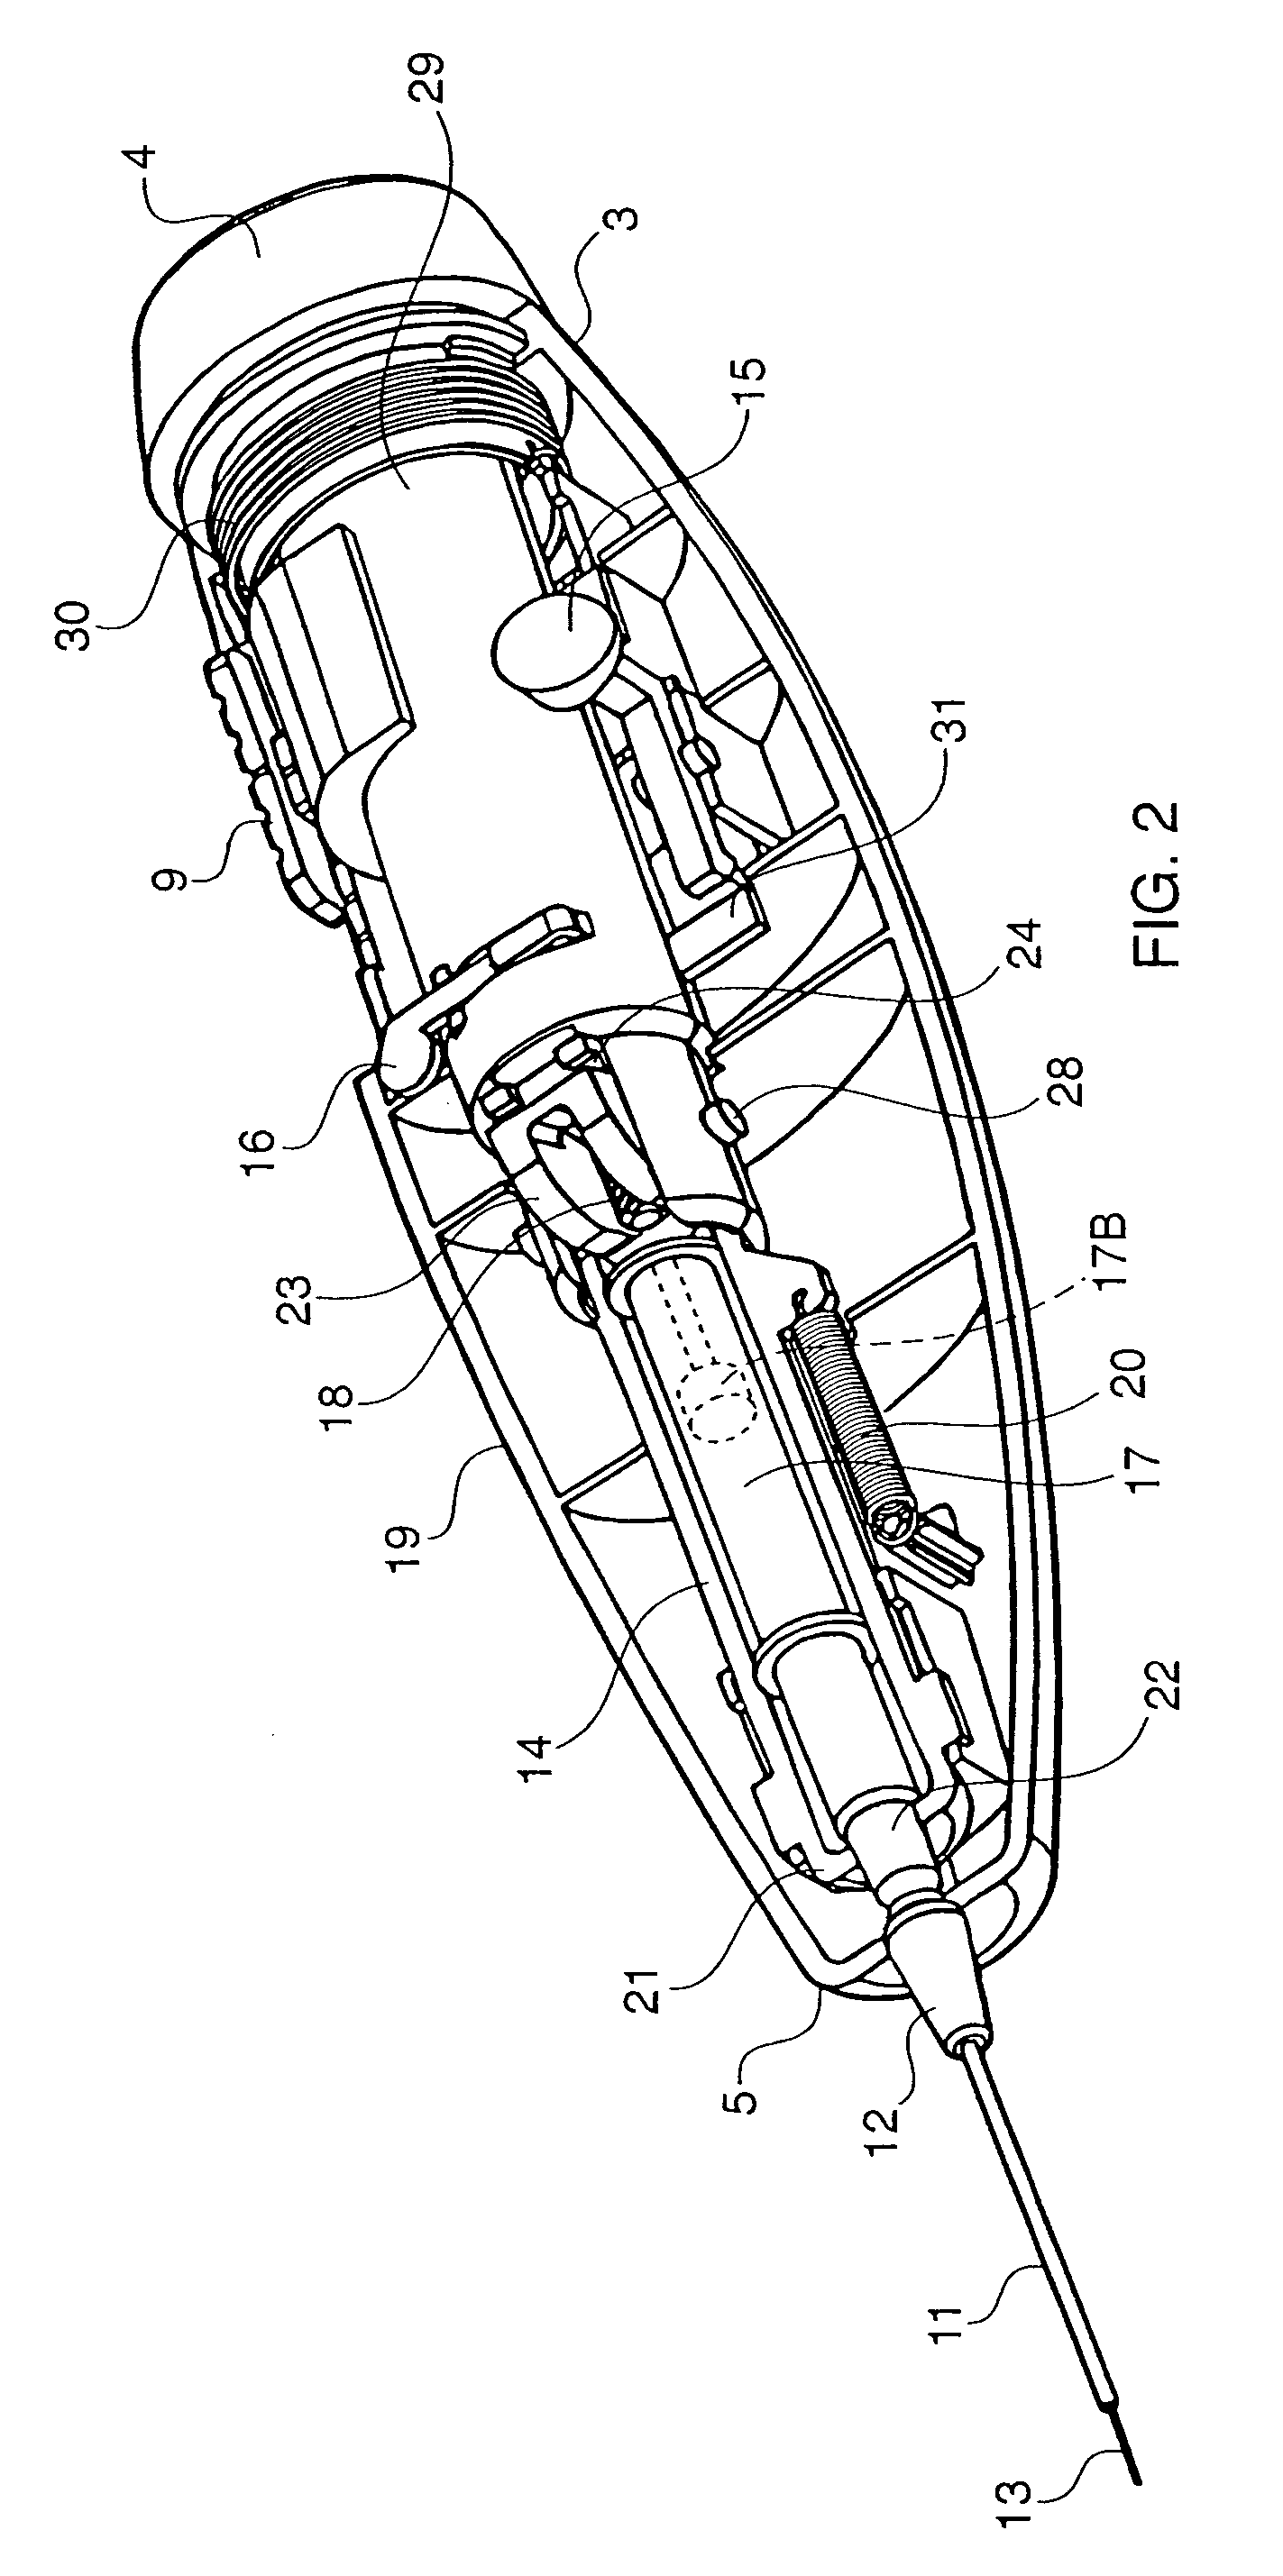 Catheter device and method for delivering a dose internally during minimally-invasive surgery